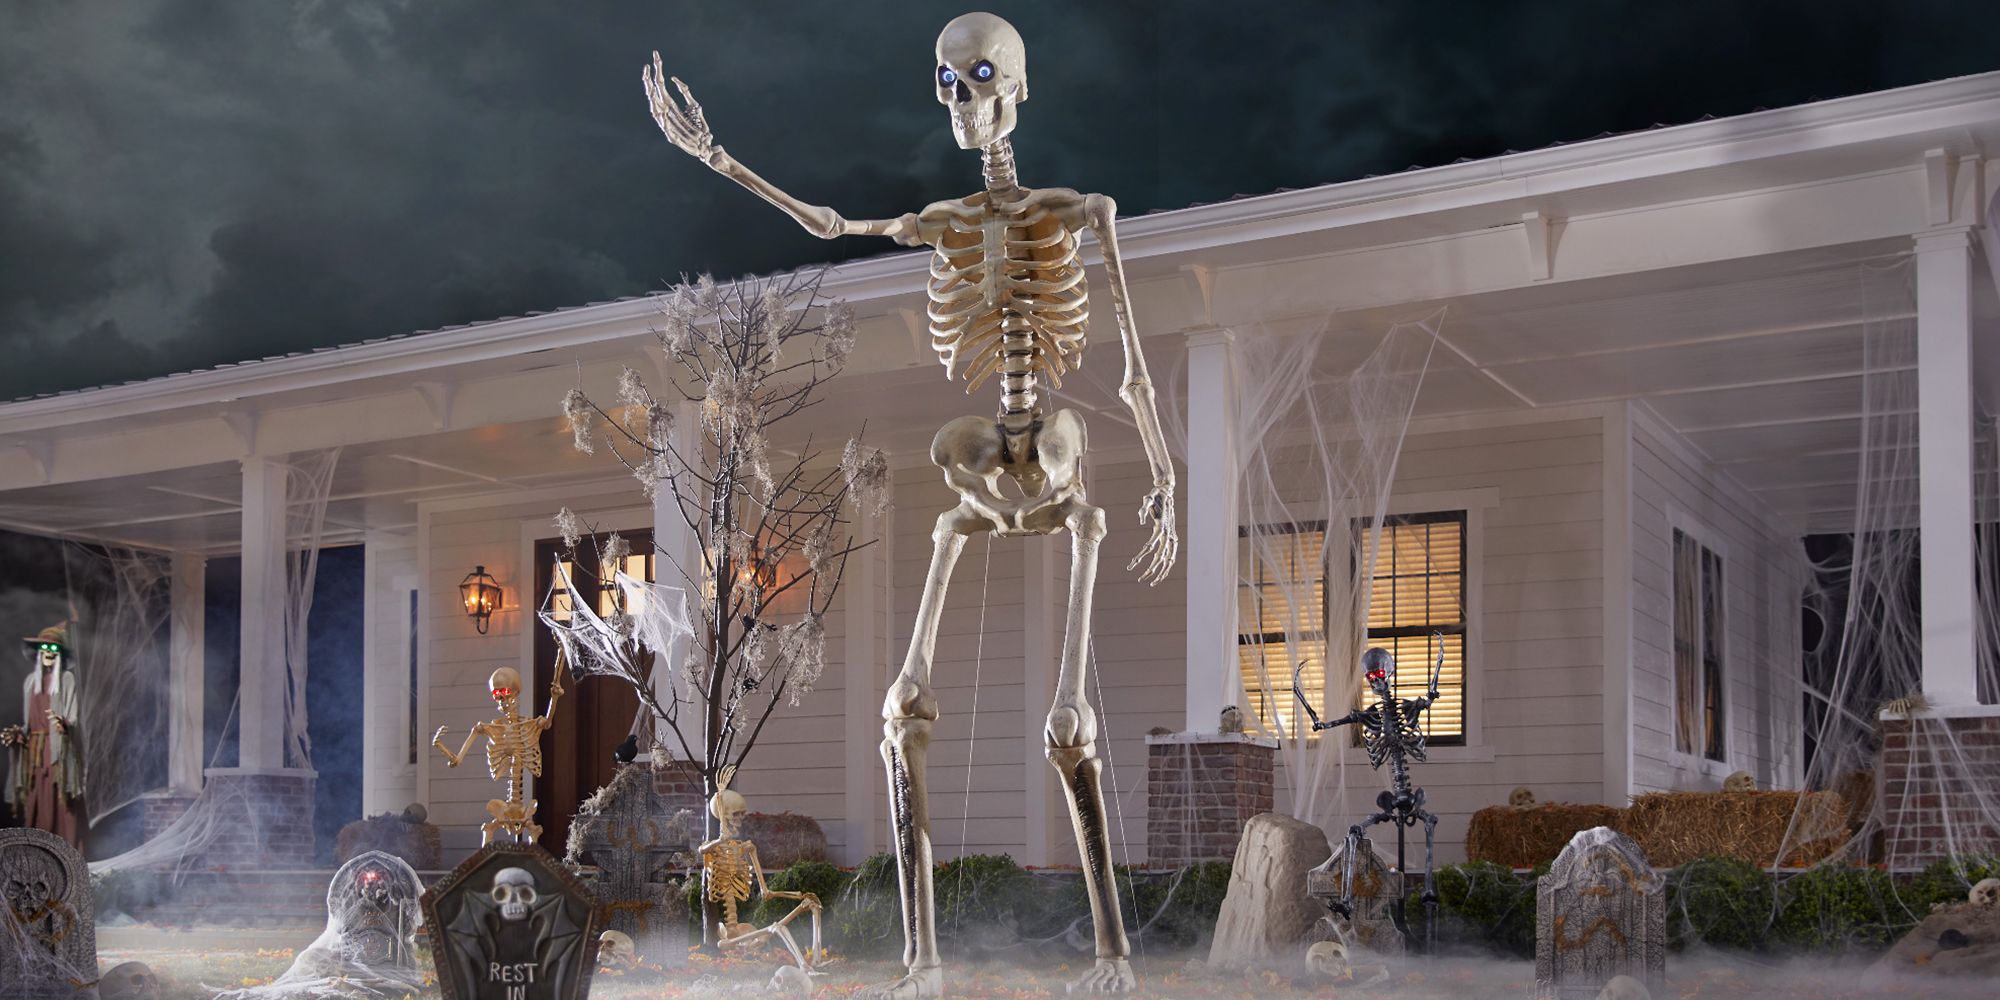 Halloween Skeleton Decorations Garden 3PCS Halloween Party Hanging Decor Haunted House 16 Full Body Plastic Skeleton Posable Joints for Skeleton Halloween Decoration Yard Patio Lawn 